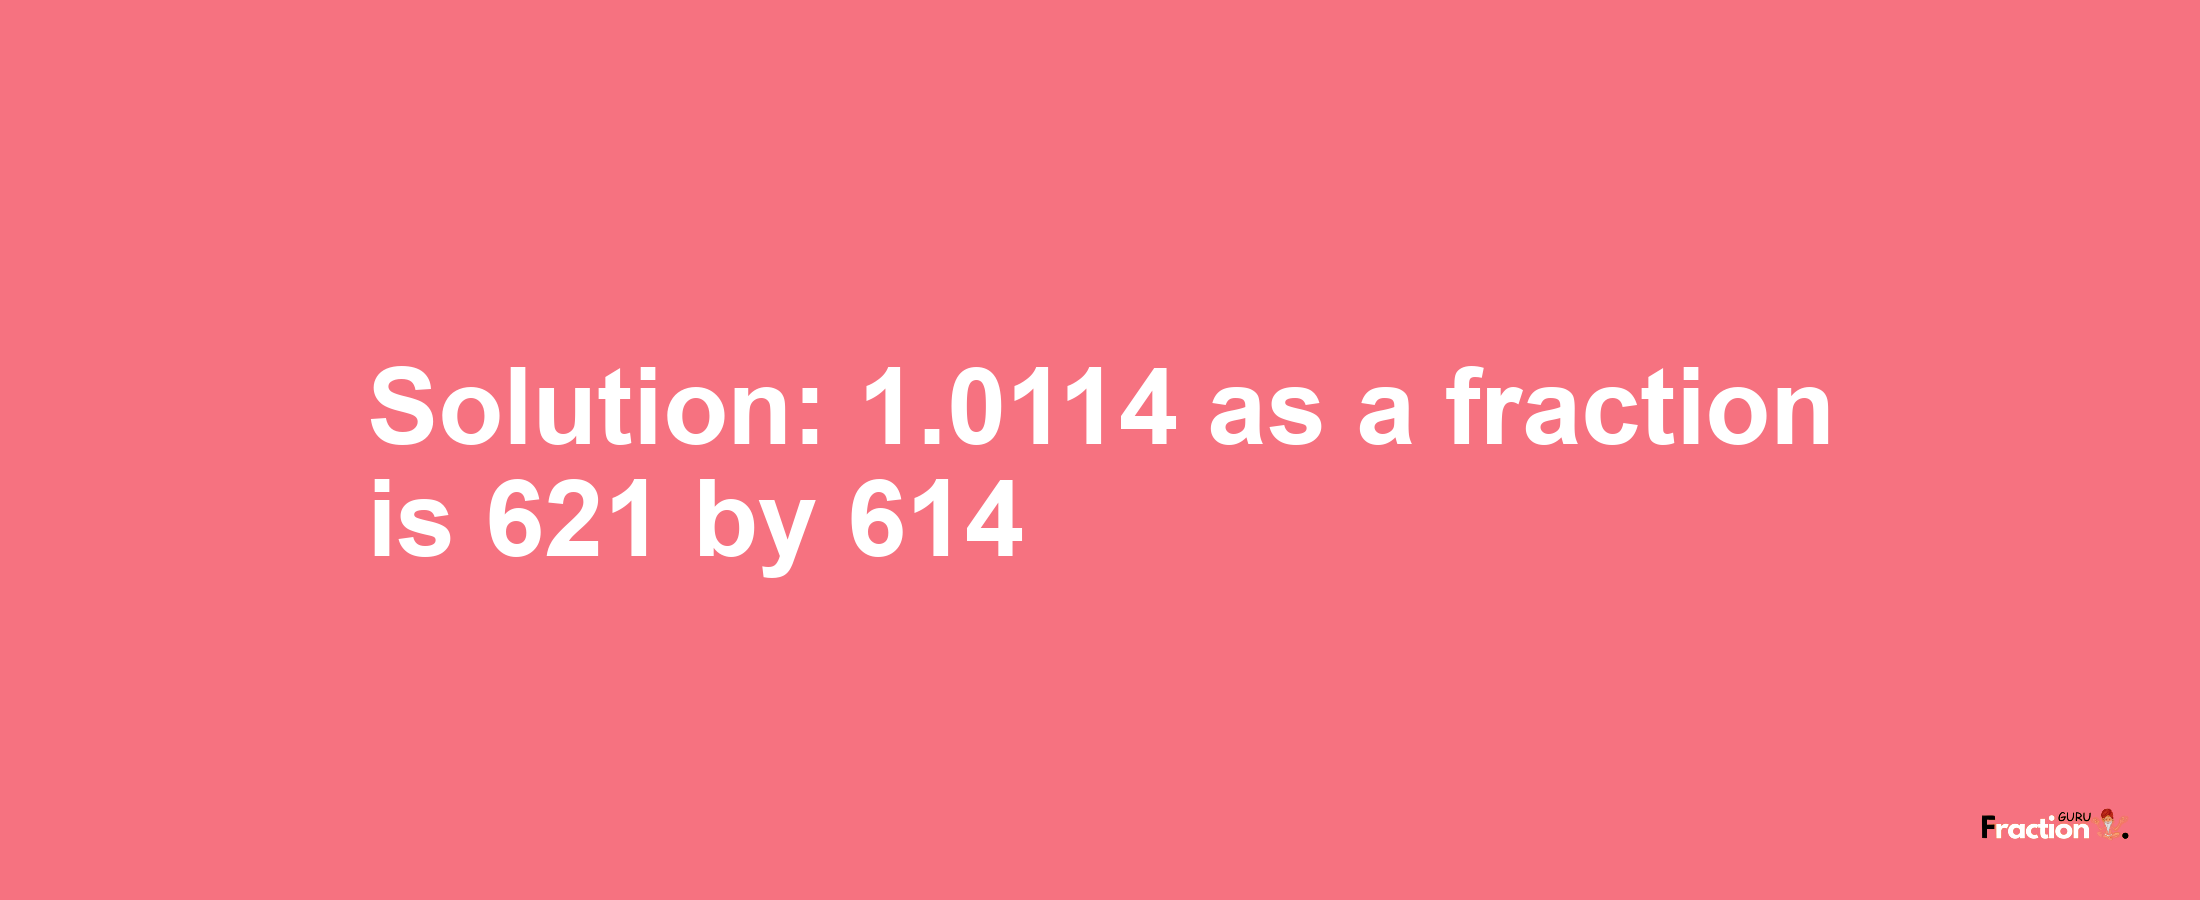 Solution:1.0114 as a fraction is 621/614